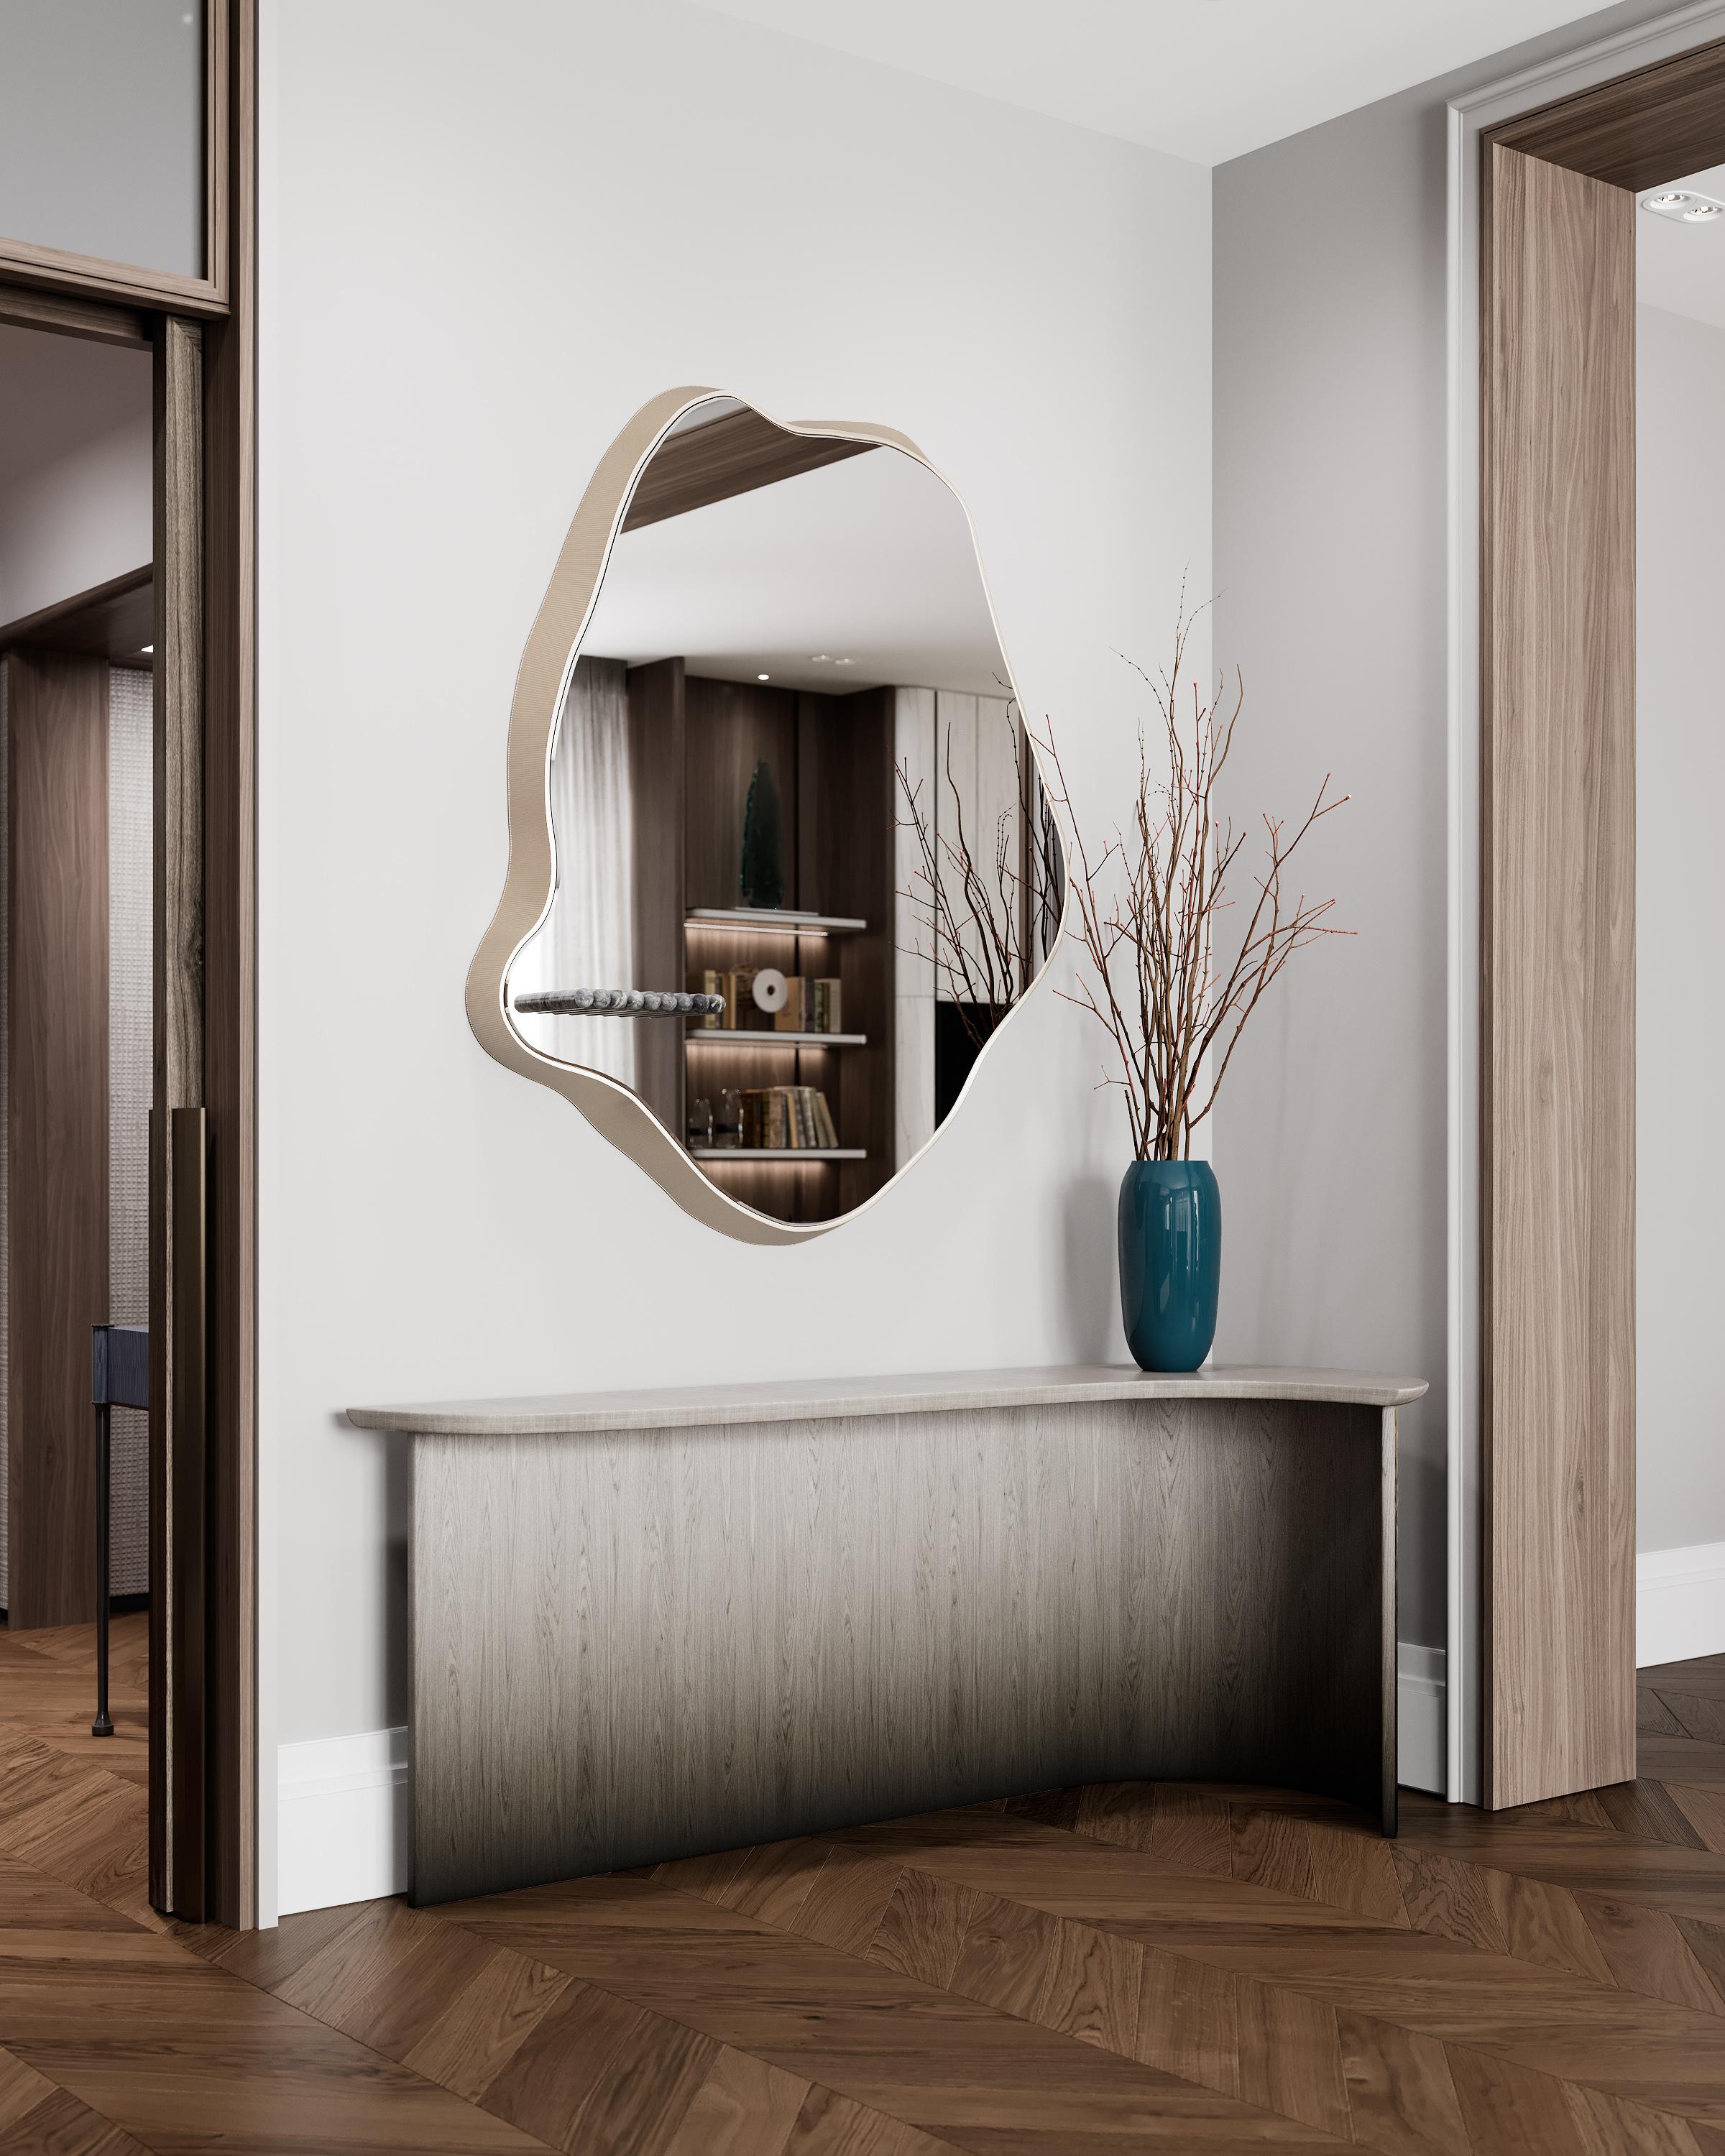 Introducing the Cloud wall mirror – as unique as the clouds in the sky! This innovative product is crafted with only the most exquisite metal finish, and its minimalistic design is ideal for modern and traditional interiors alike. Its curved lines